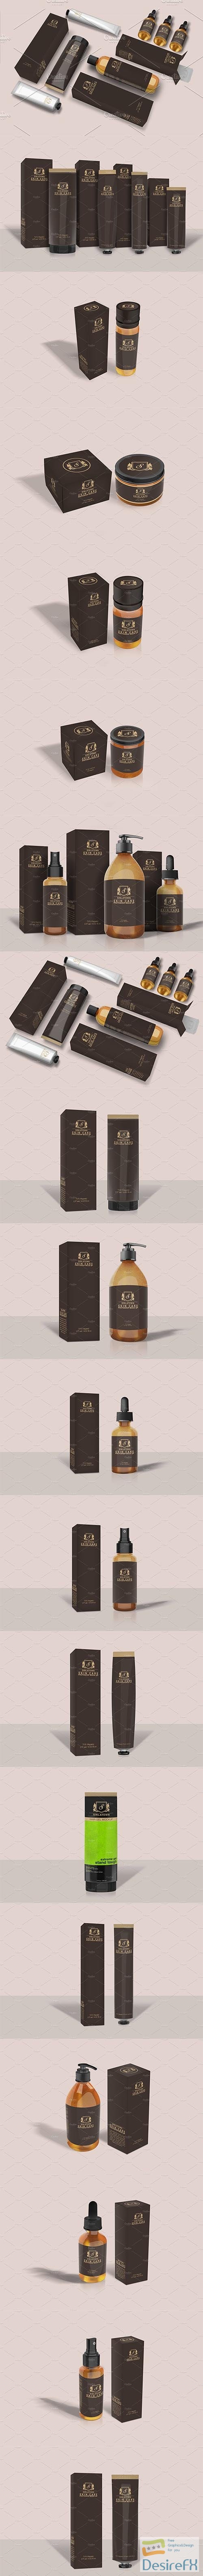 CreativeMarket - 18 Personal Care Cosmetic Products 2779300